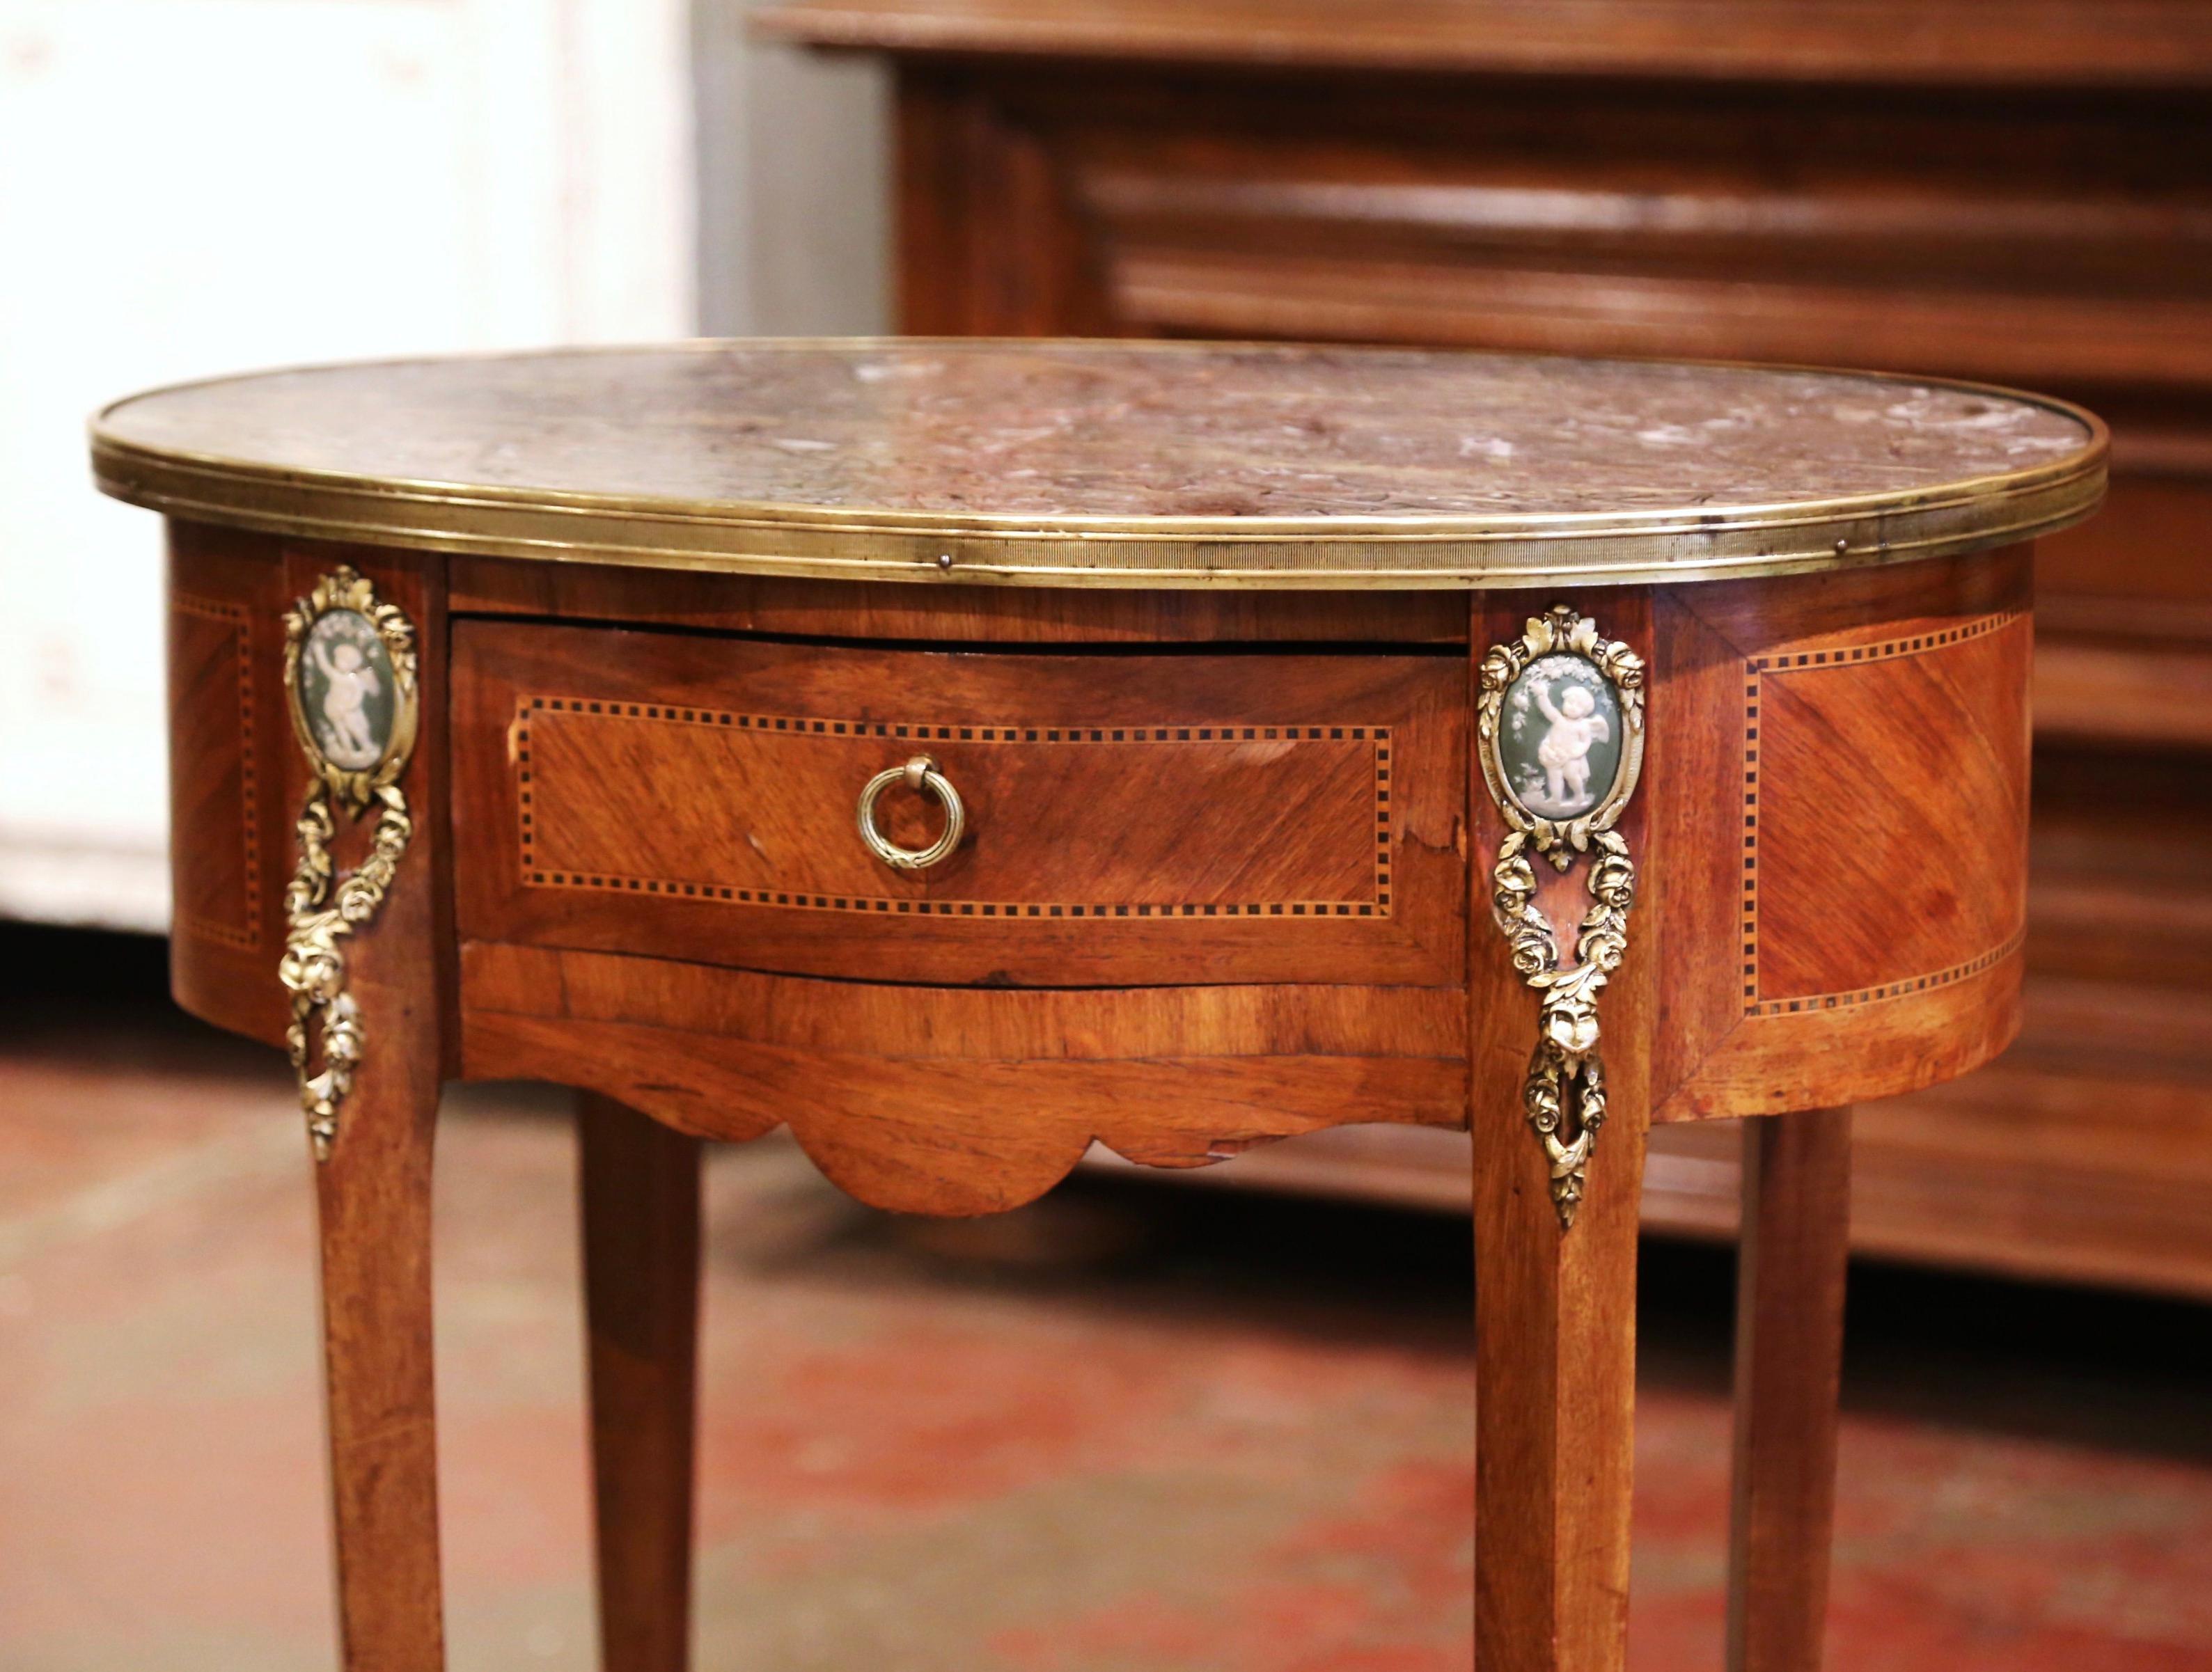 Crafted in France circa 1880, the elegant antique table stands on cabriole legs decorated with cherub porcelain plaque mounts at the shoulder, and ending with sabot feet. The table features detailed inlaid marquetry work around the apron, and is